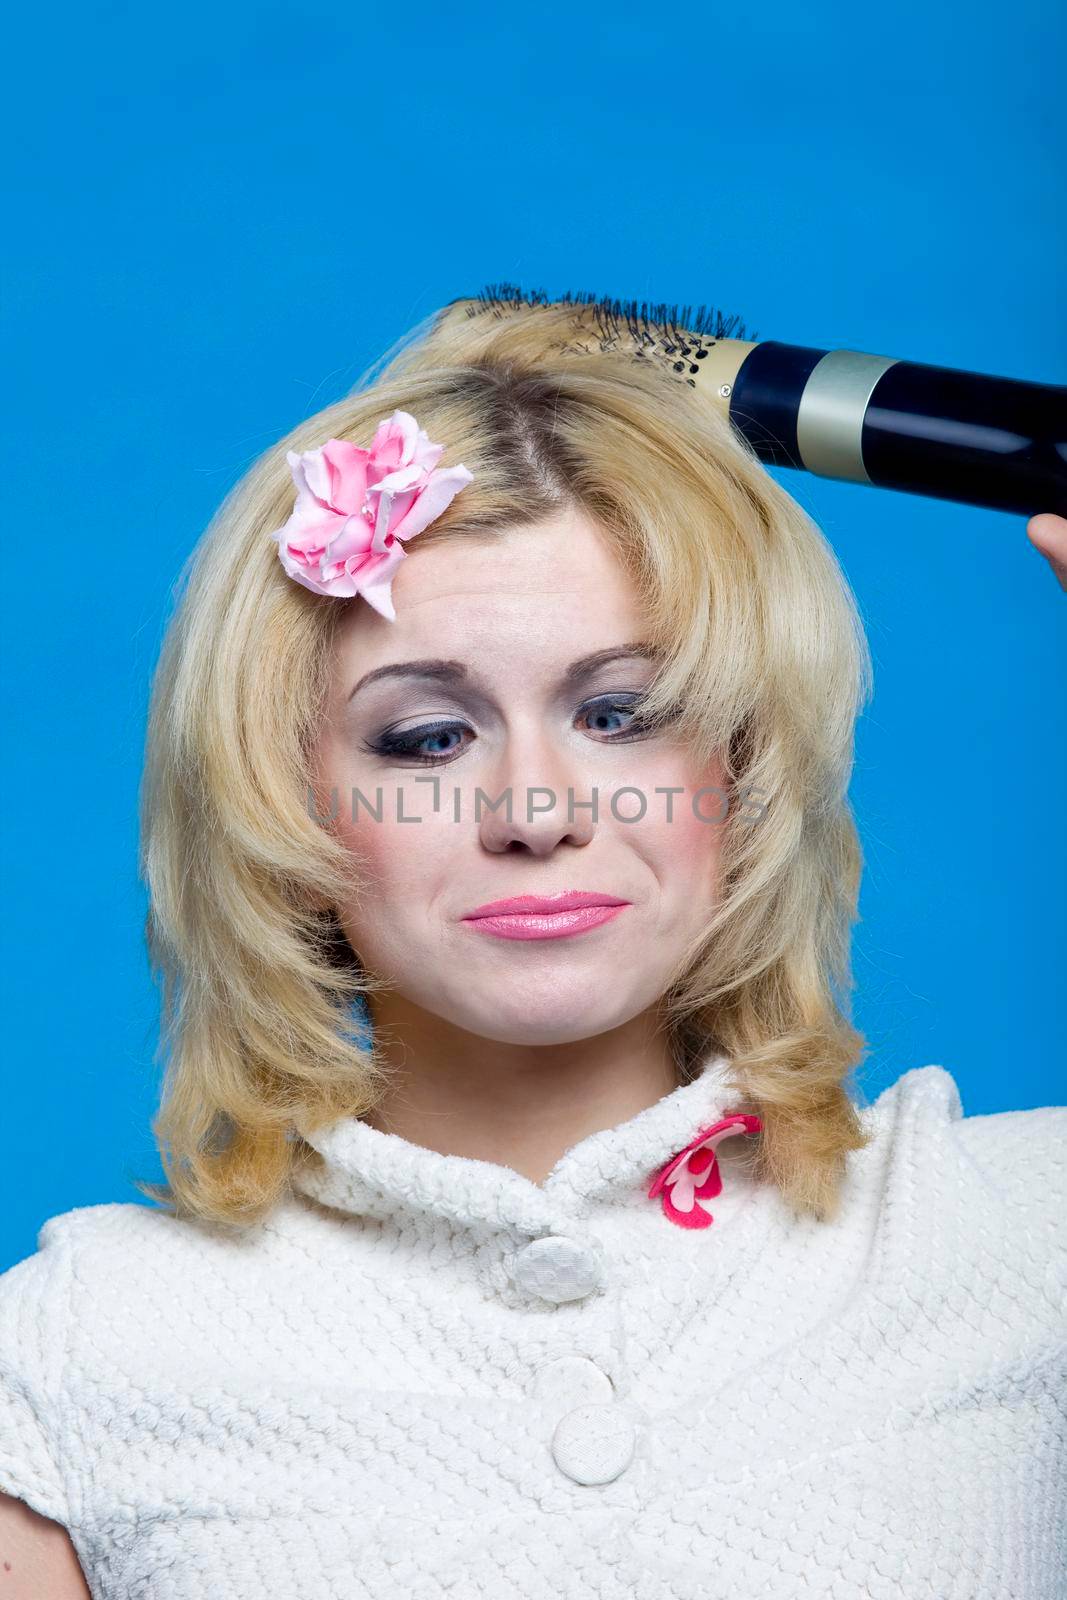 Young blond with hairdryer studio shot pin-up style